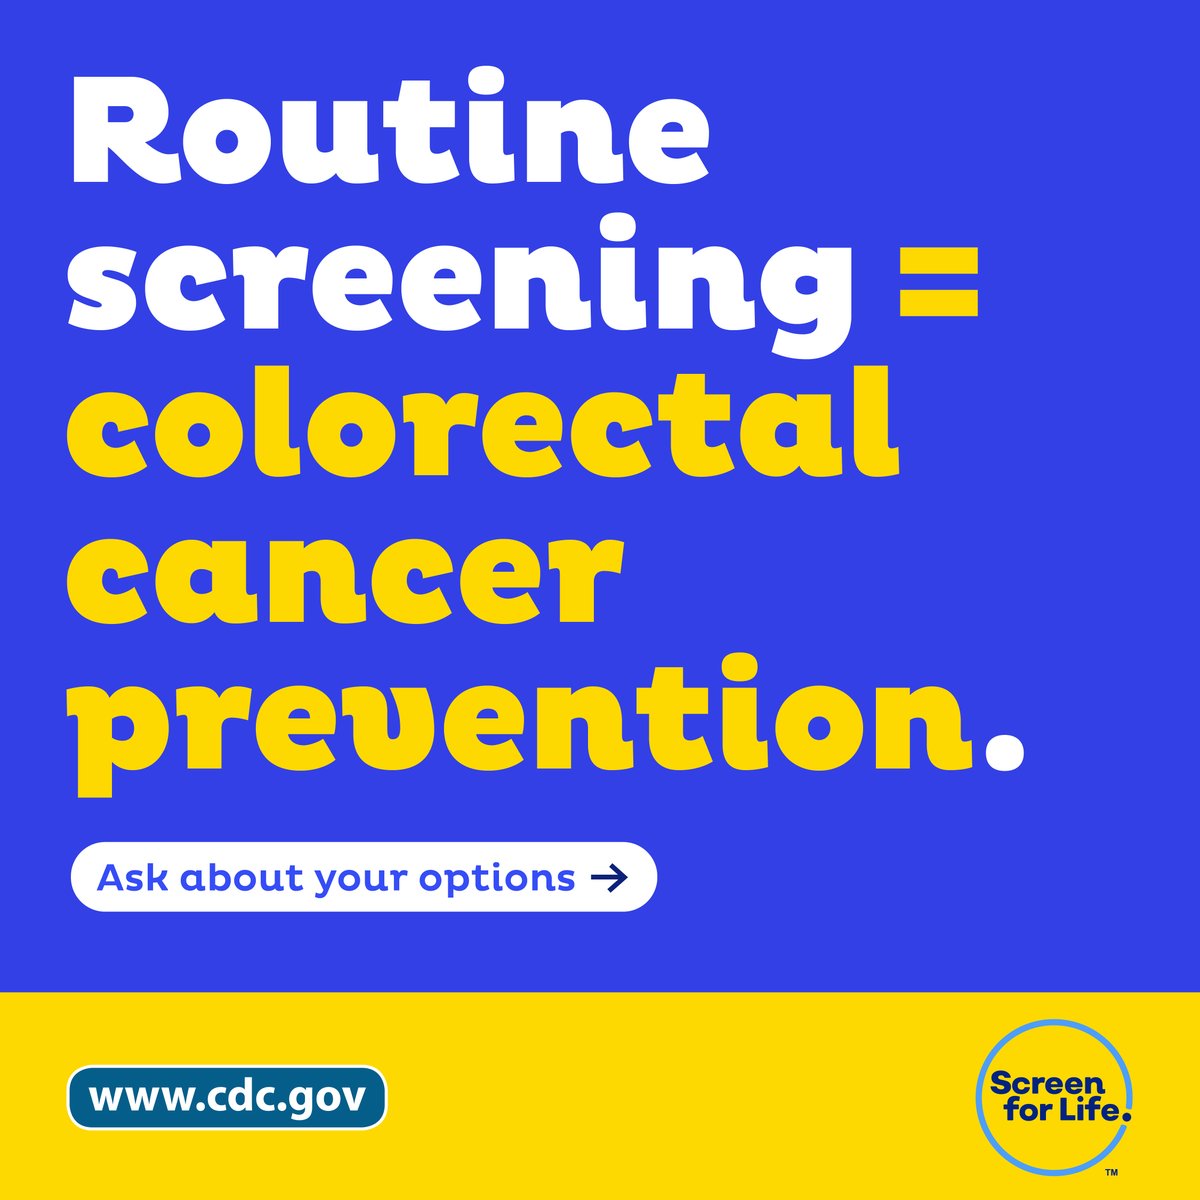 Screening tests can prevent #ColorectalCancers by removing precancerous problems before they turn into #cancer. Tests can find other cancers early when treatment is likely to work best. Are you due for a screening test? bit.ly/3QD5f9c